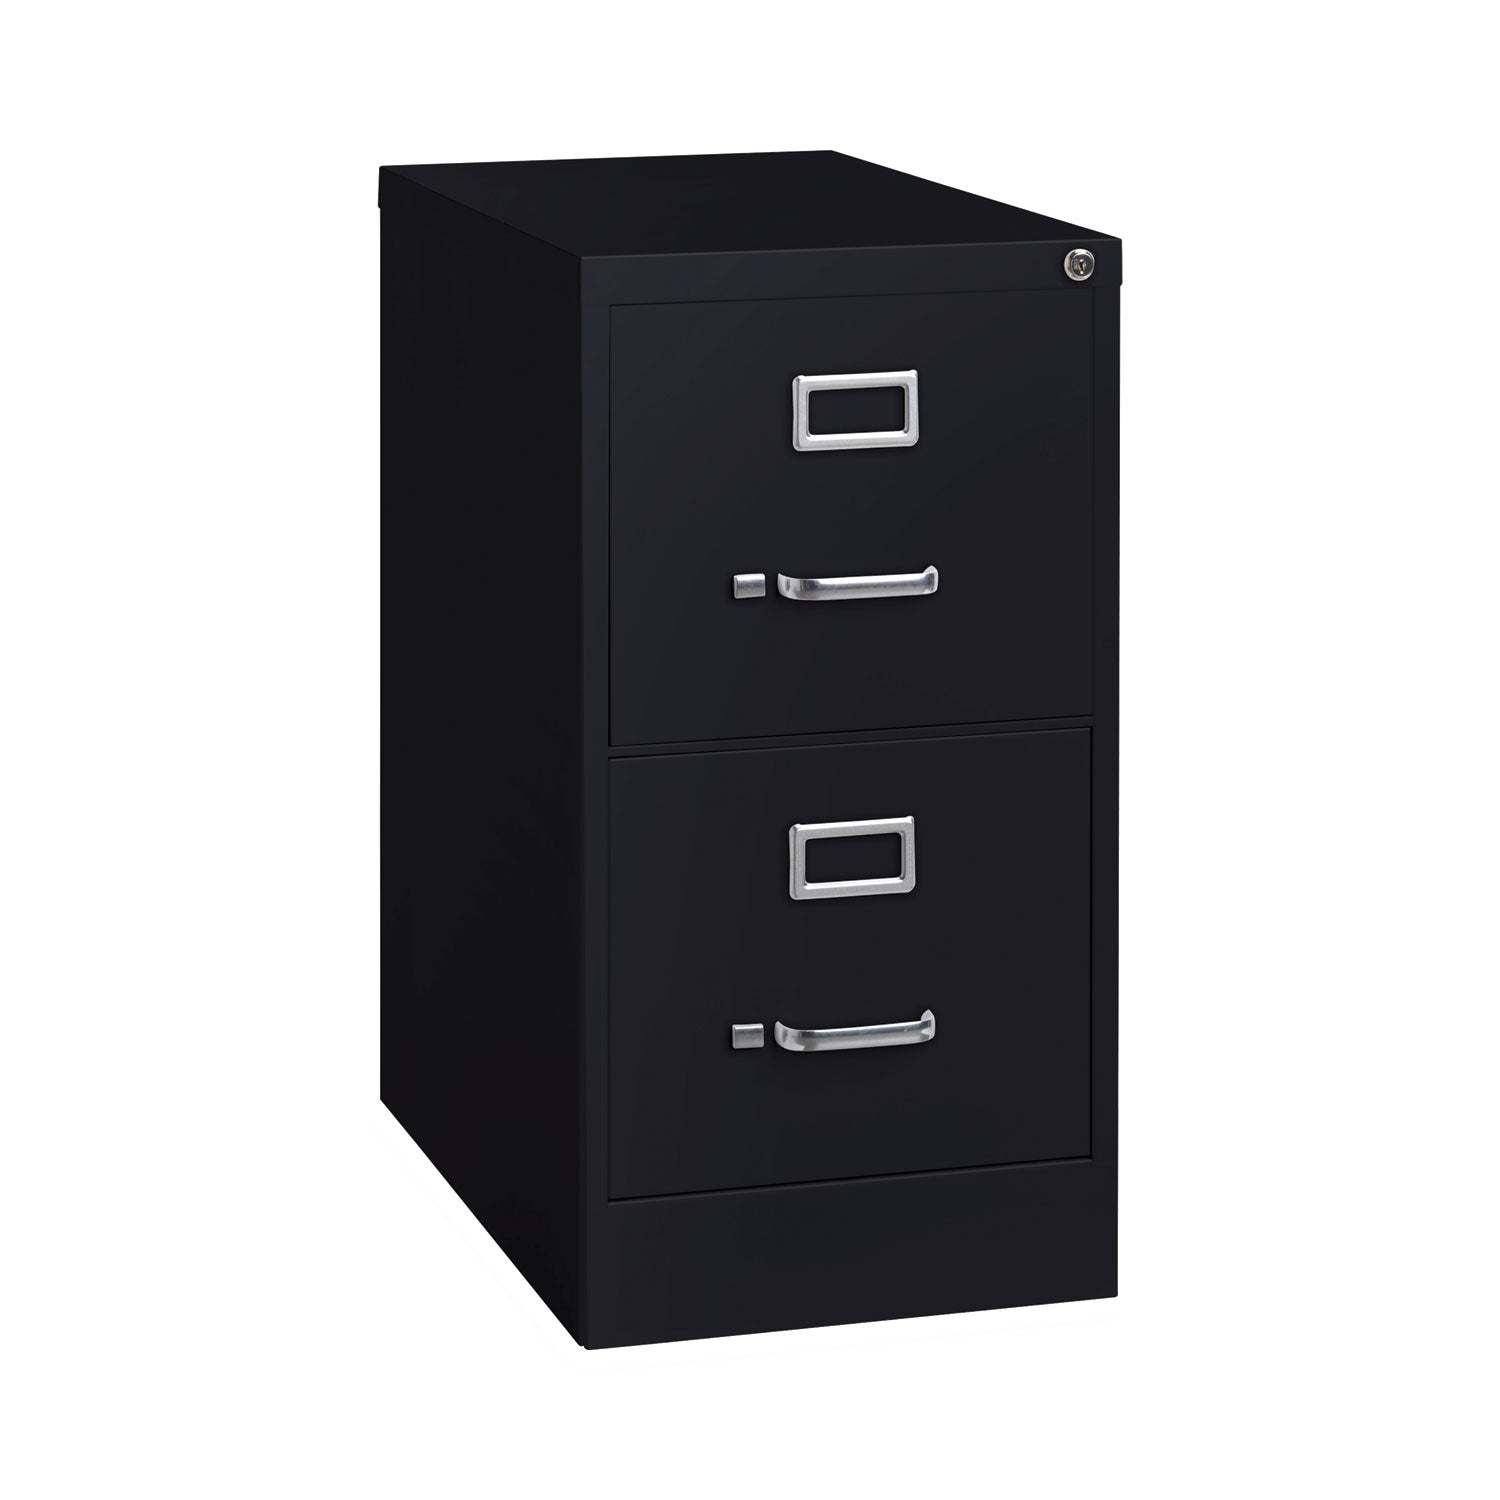 vertical-letter-file-cabinet-2-letter-size-file-drawers-black-15-x-22-x-2837_hid17890 - 2